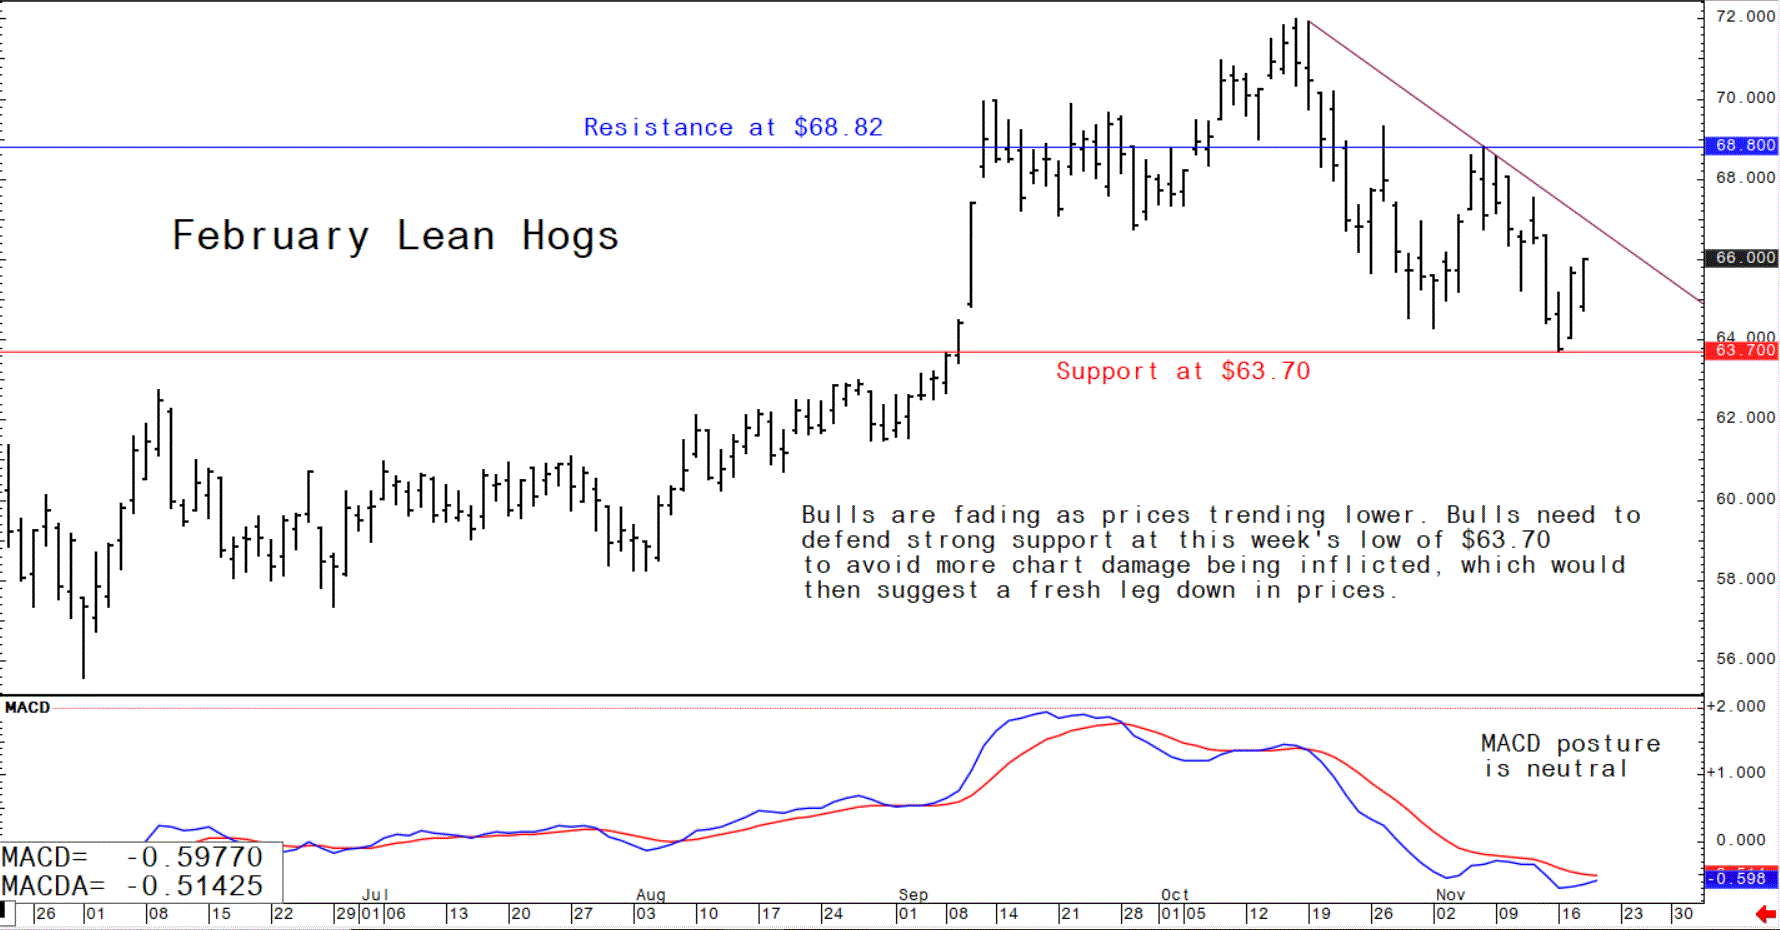 Graph showing the trade of US lean hog futures for February 2021